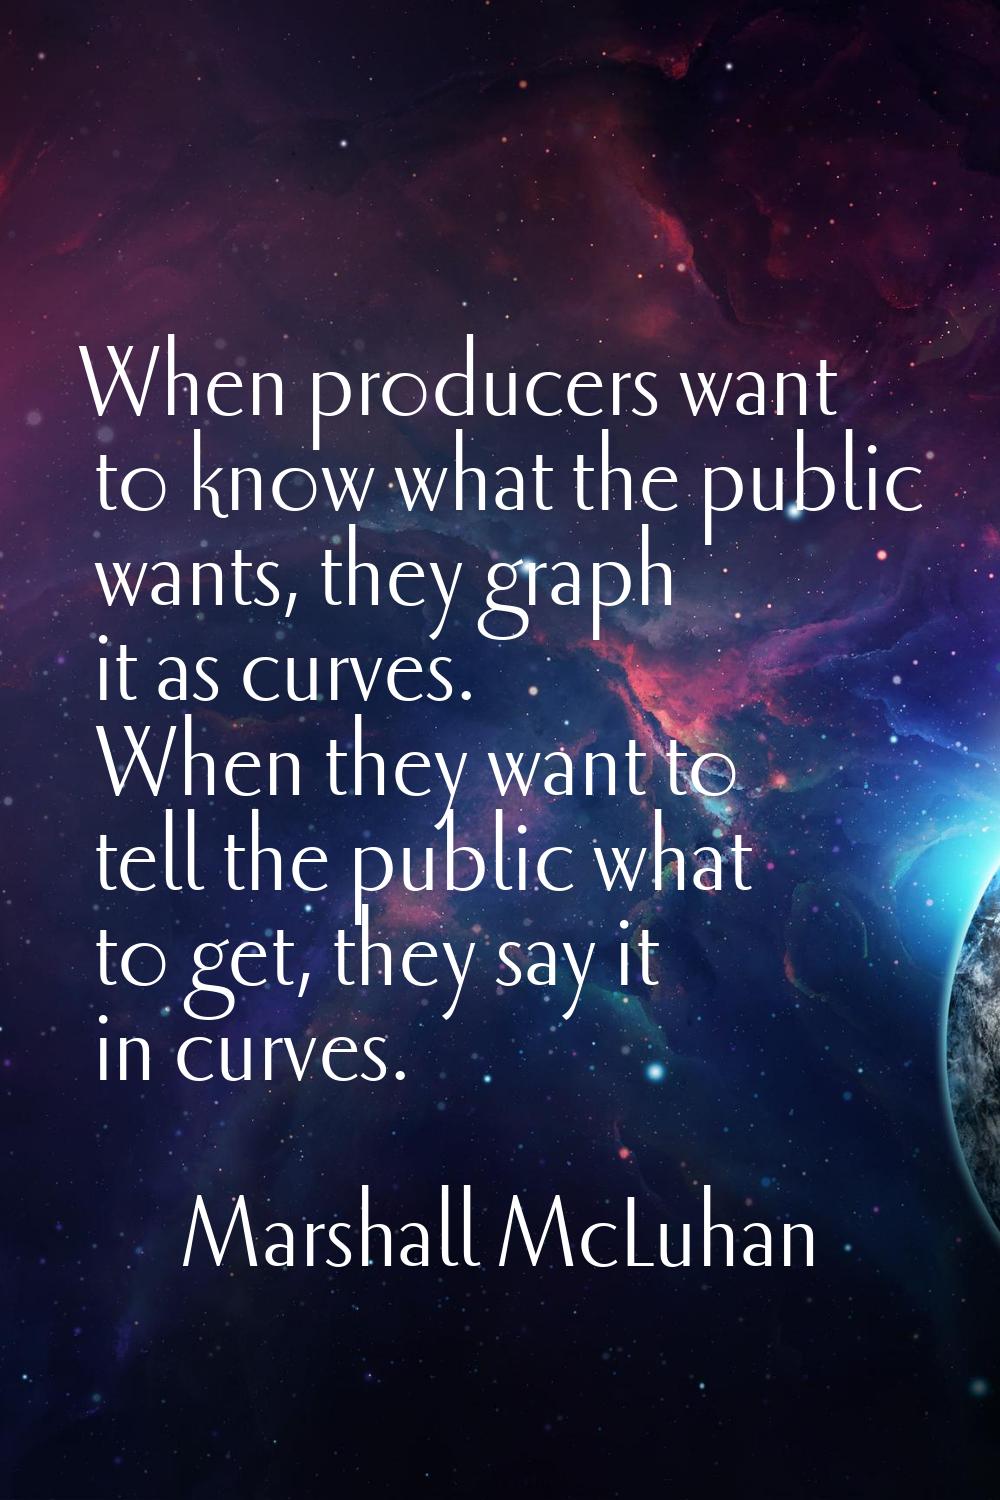 When producers want to know what the public wants, they graph it as curves. When they want to tell 